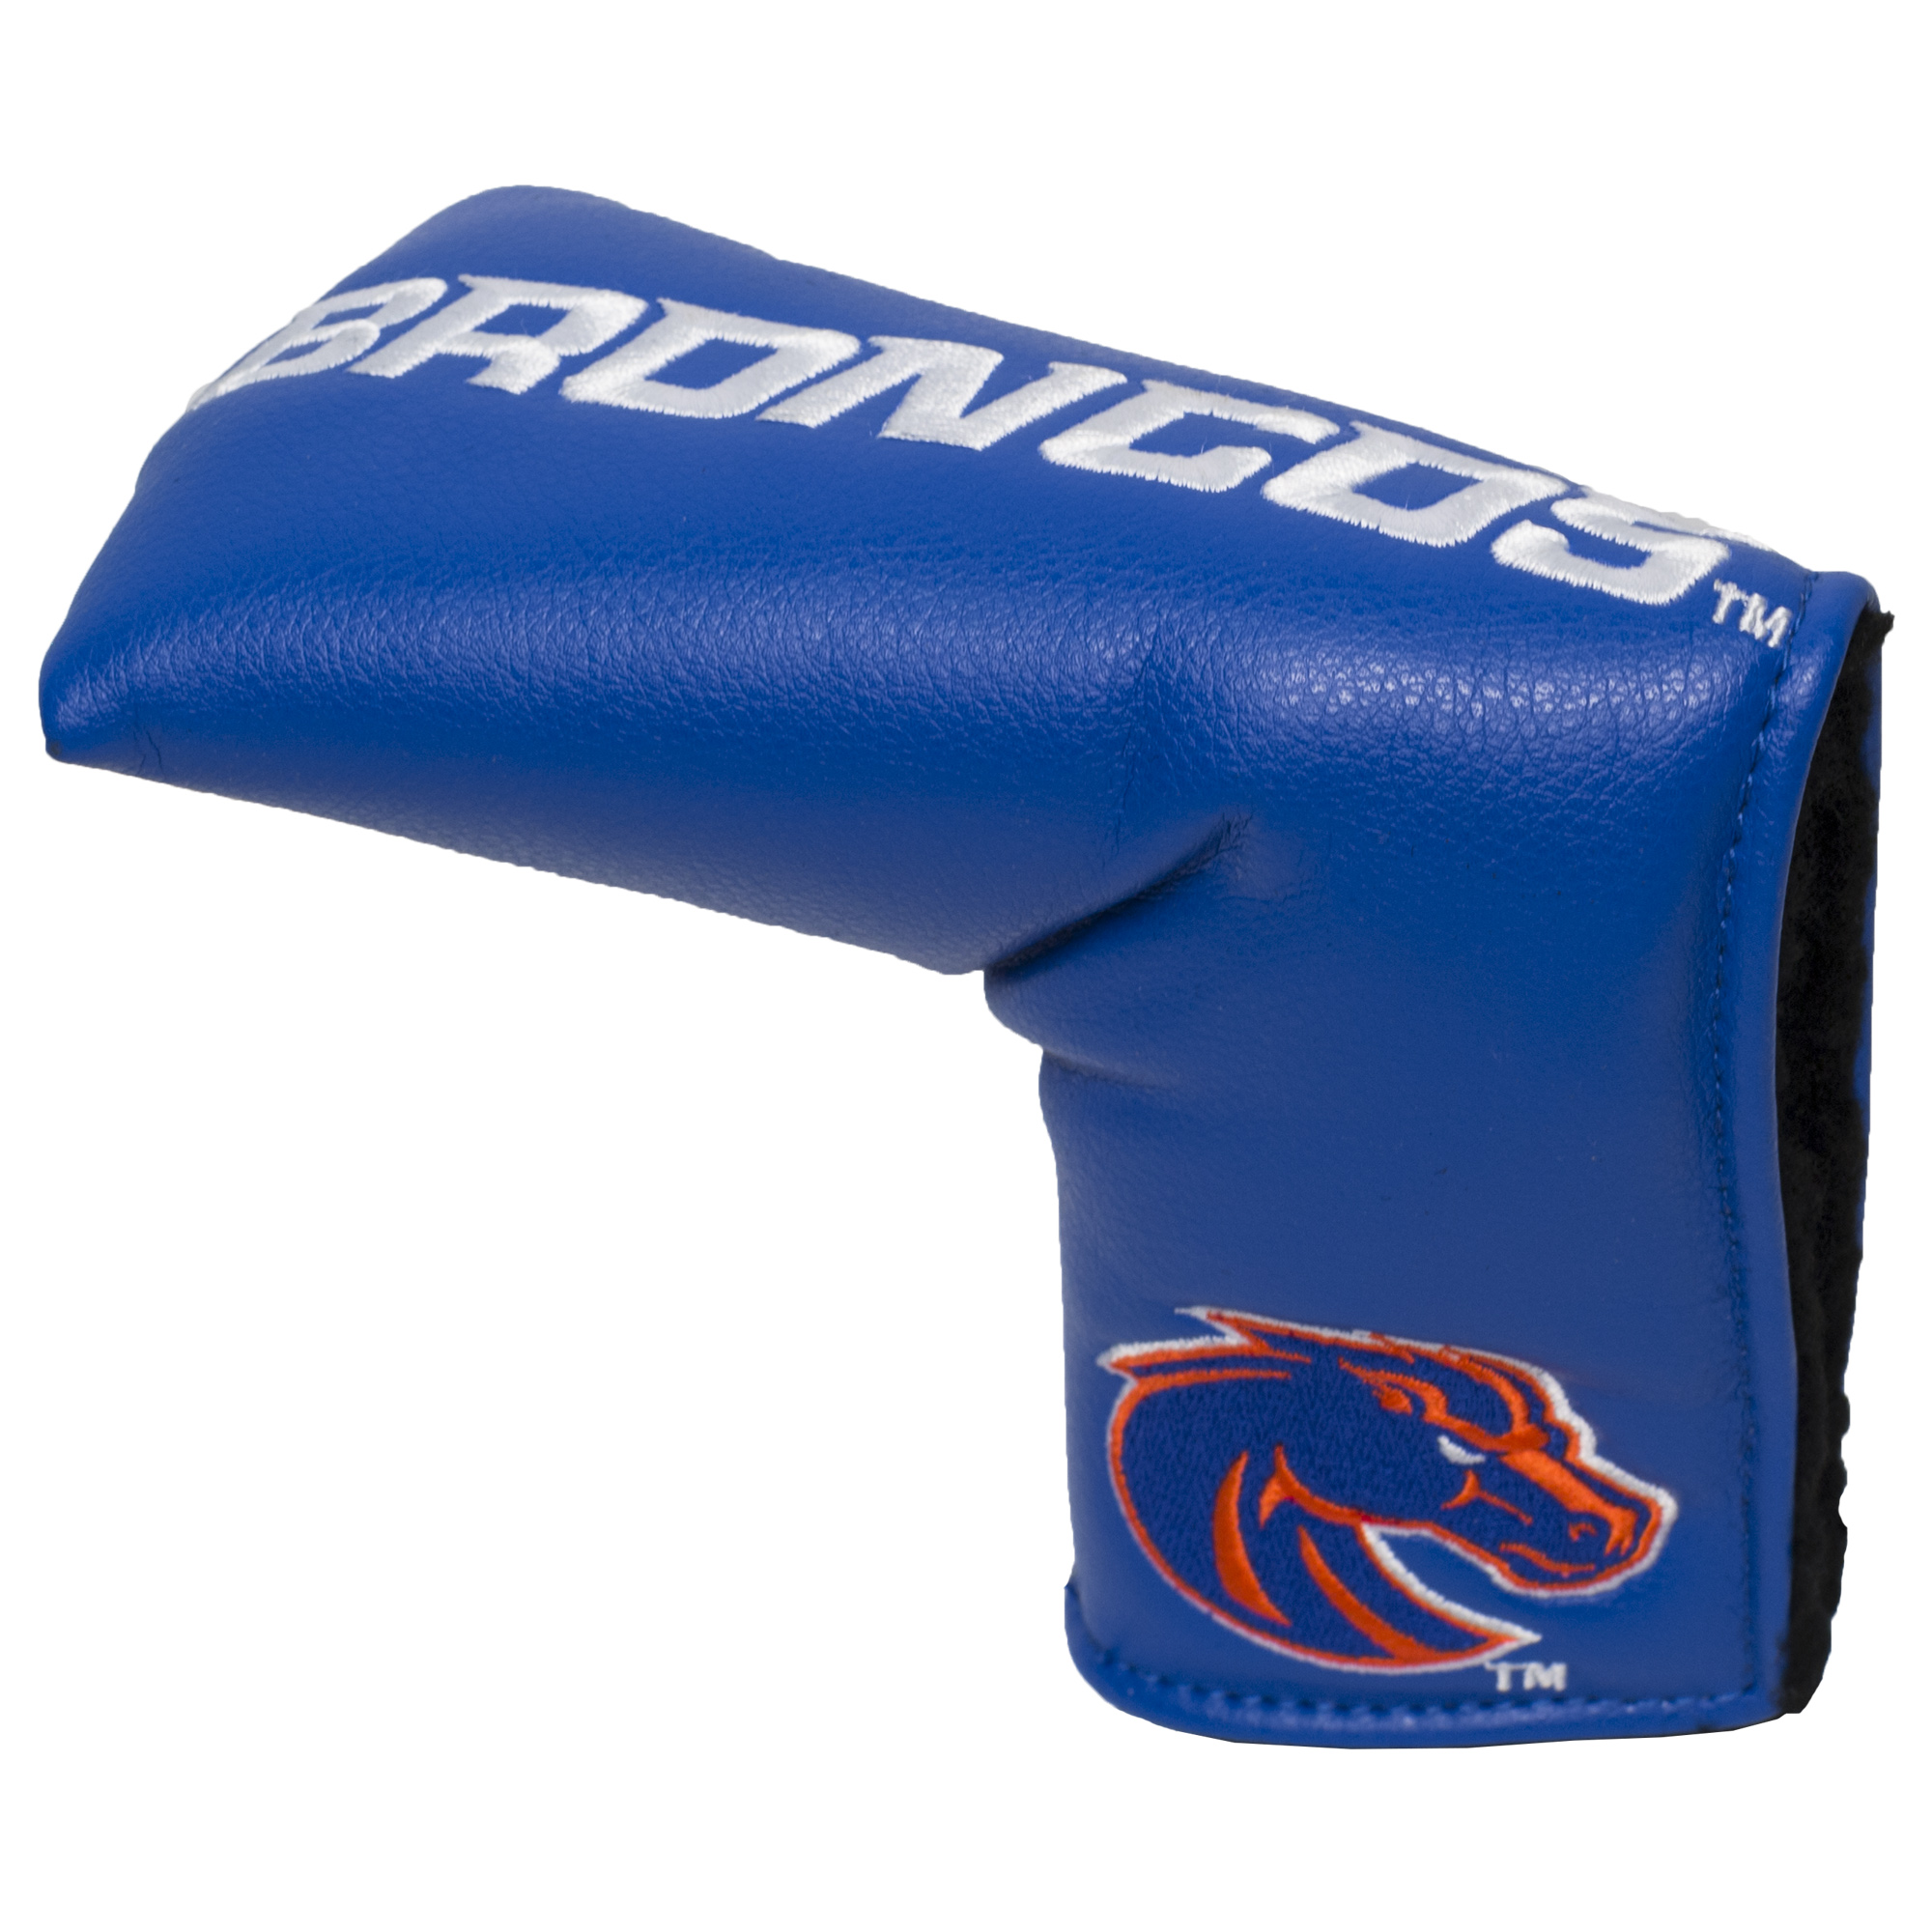 Boise State Blade Putter Cover